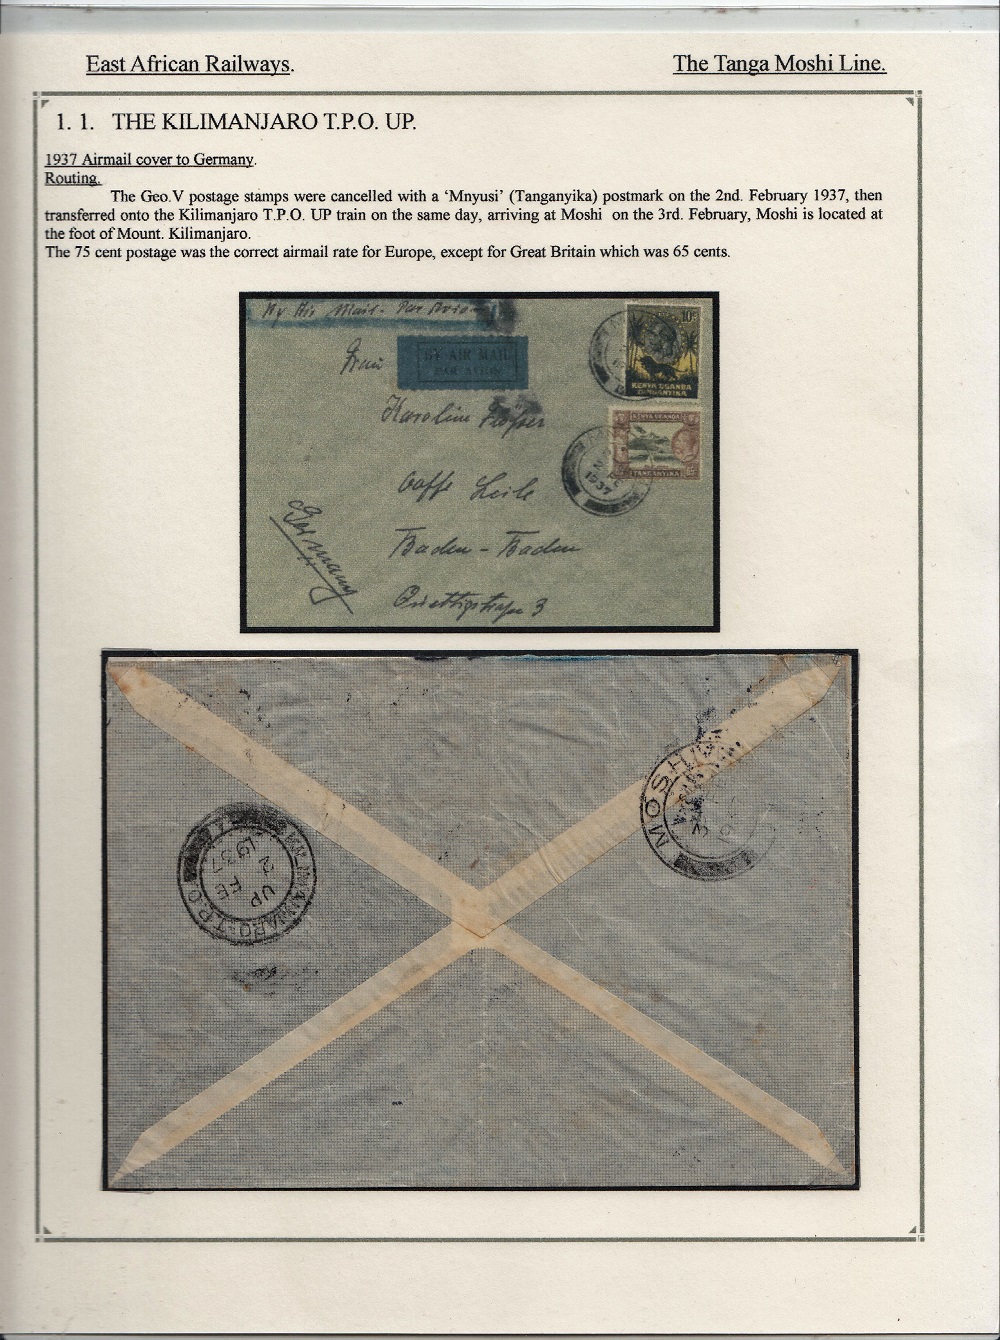 Page 8 of exhibit